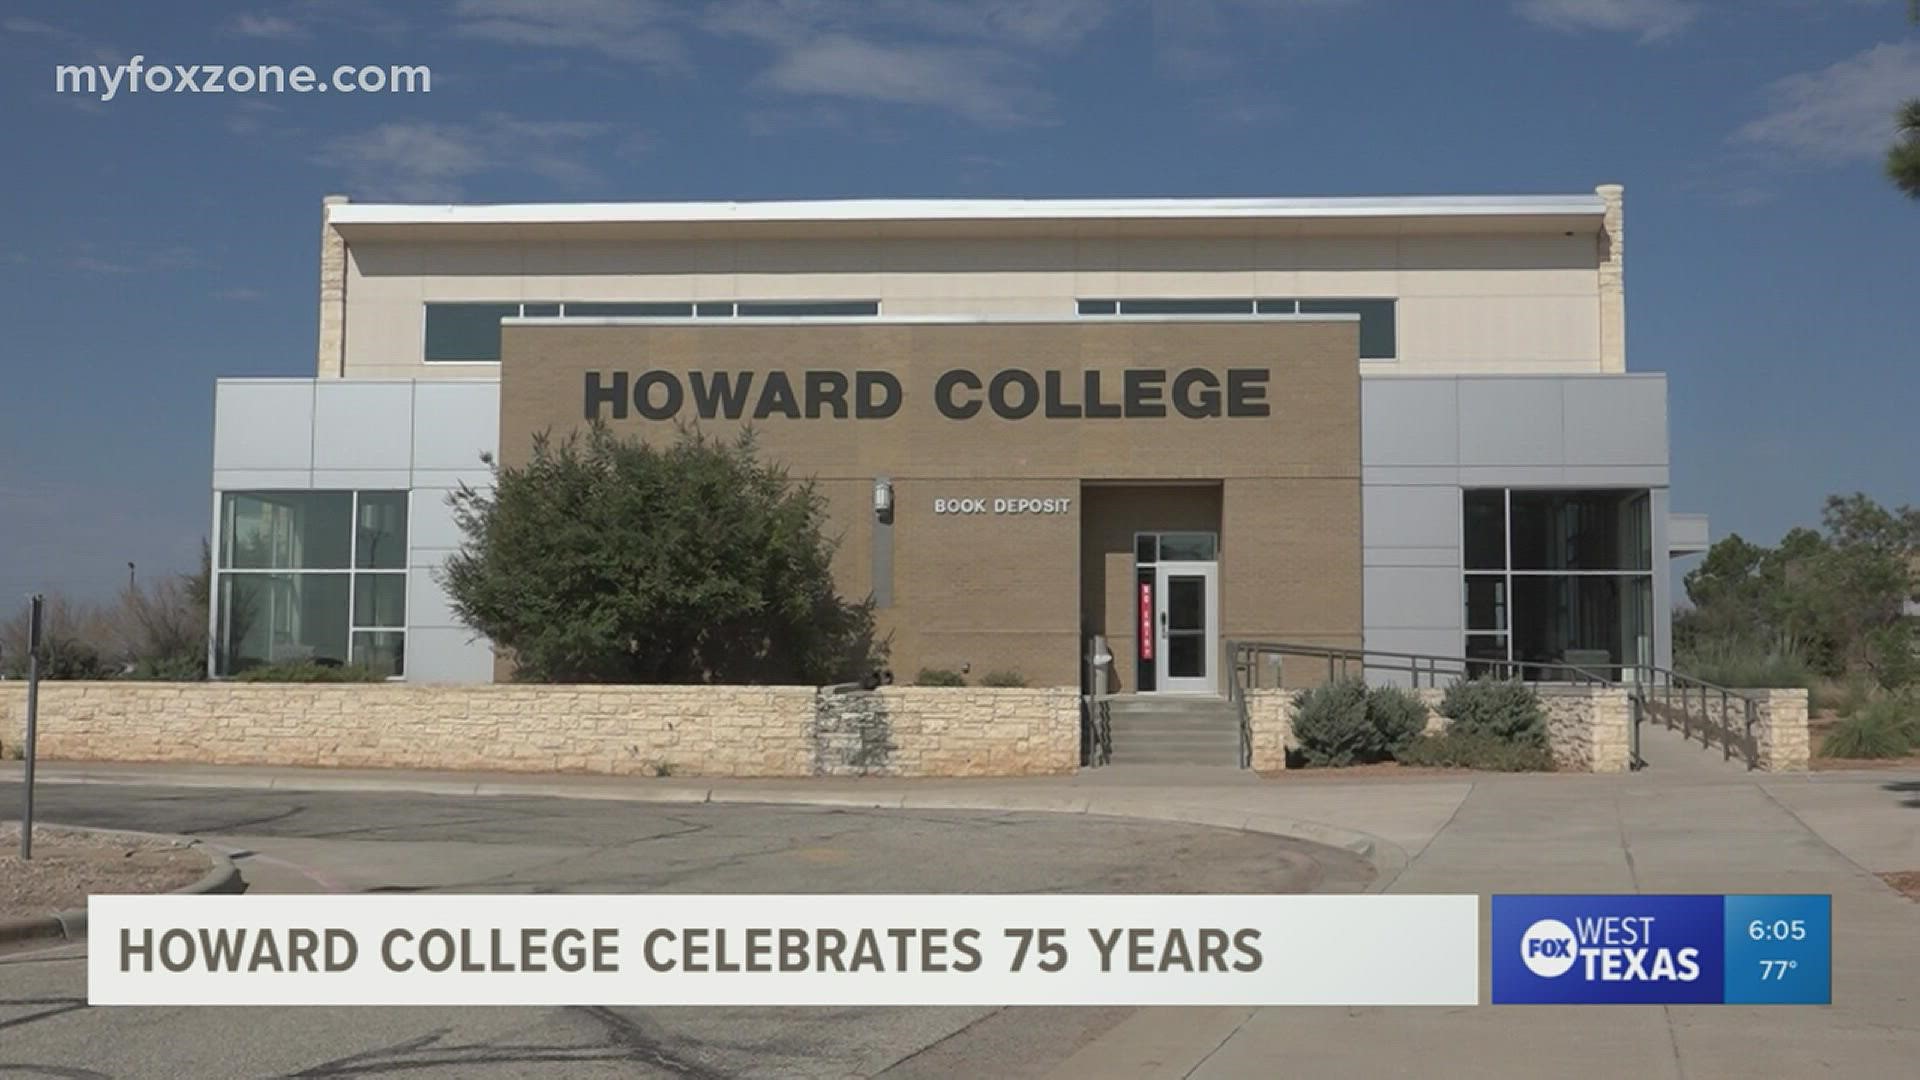 It's been 75 years since Howard College held their first class on campus.